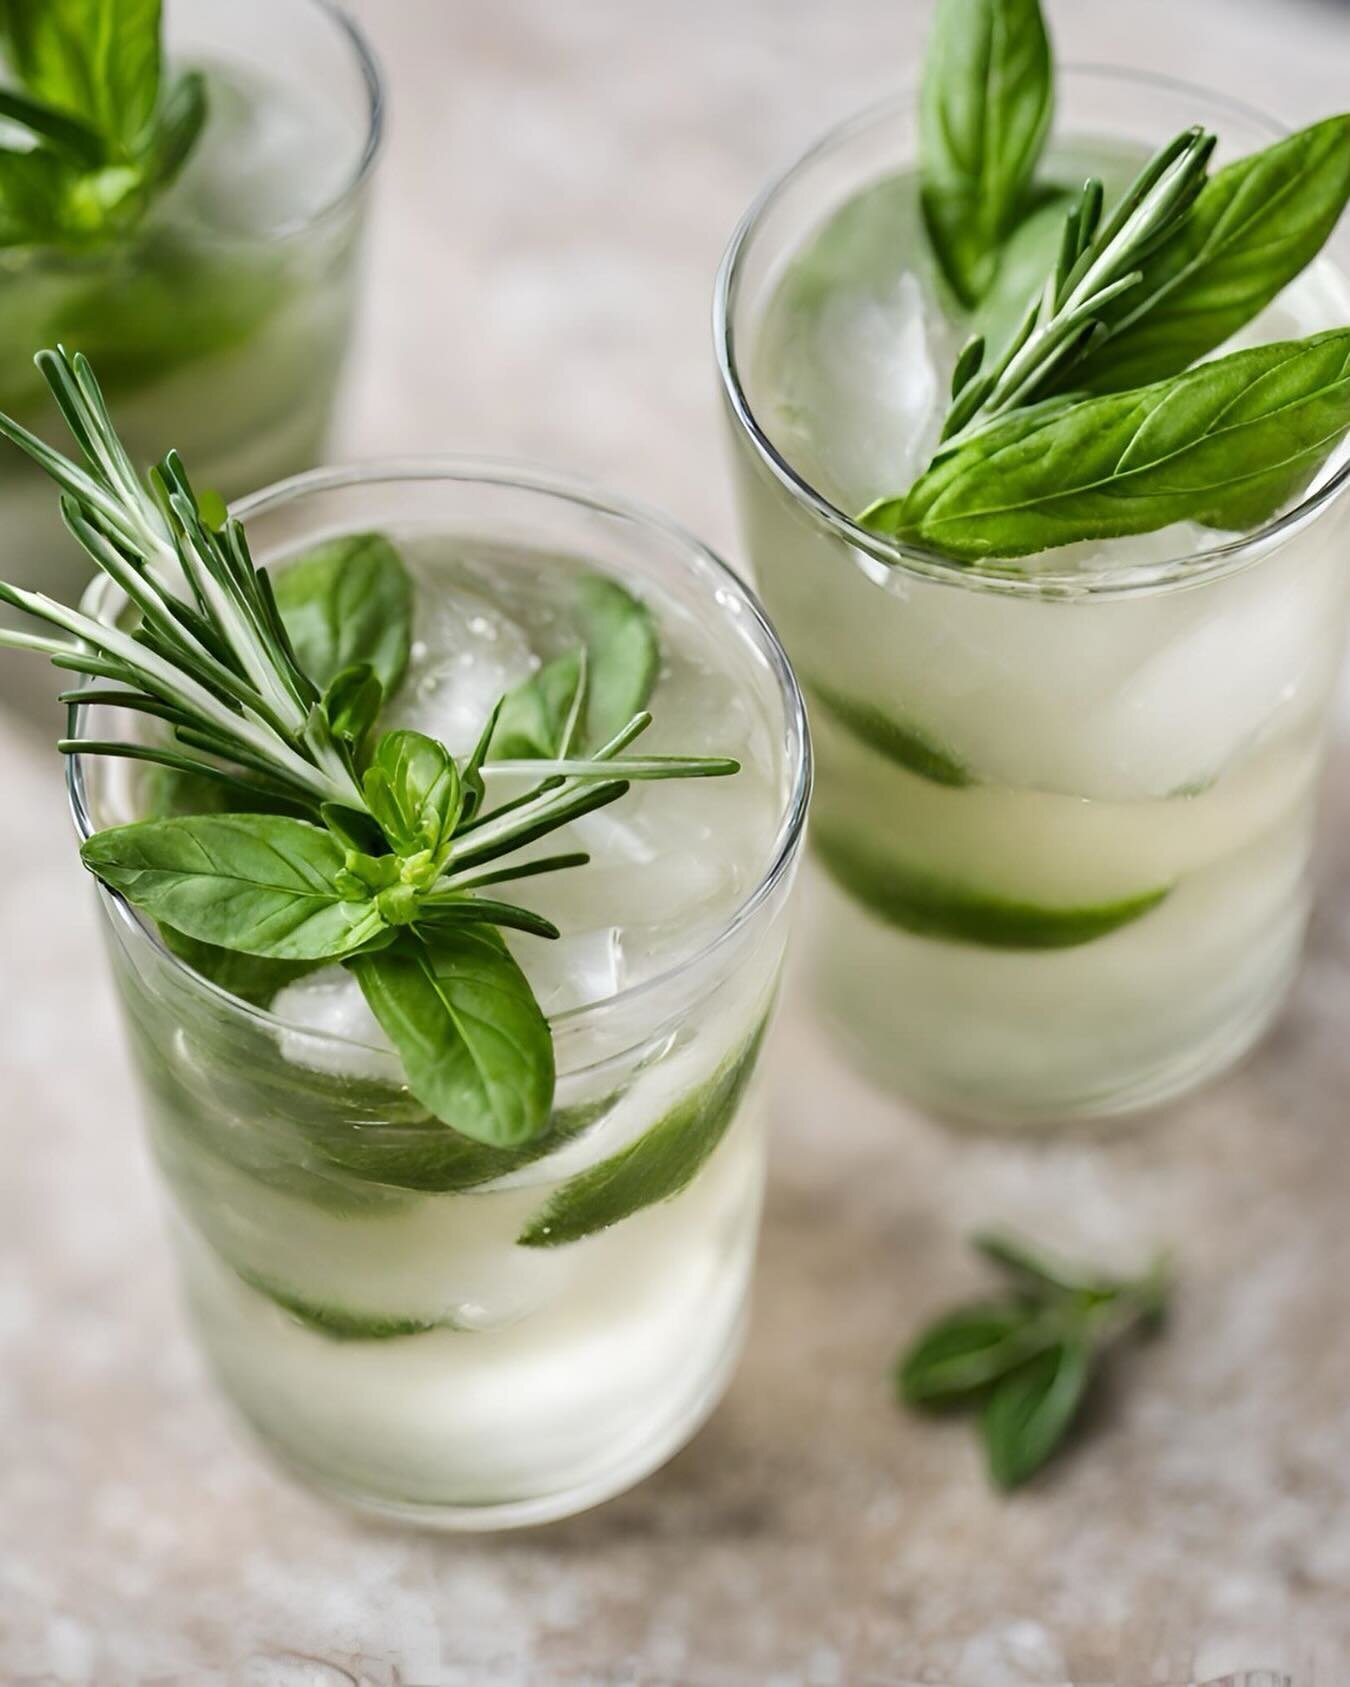 Keep it simple &amp; tasty.
🌿Rosemary Basil Vodka Smash&nbsp;&nbsp;&nbsp;&nbsp;&nbsp;&nbsp;

#vodkasmash #drstoners #virginia #vodka #cheers #monday #march #drinkup #wednesday #humpday #simplicity #shoutout #cocktails #drinkstagram #cocktailgram